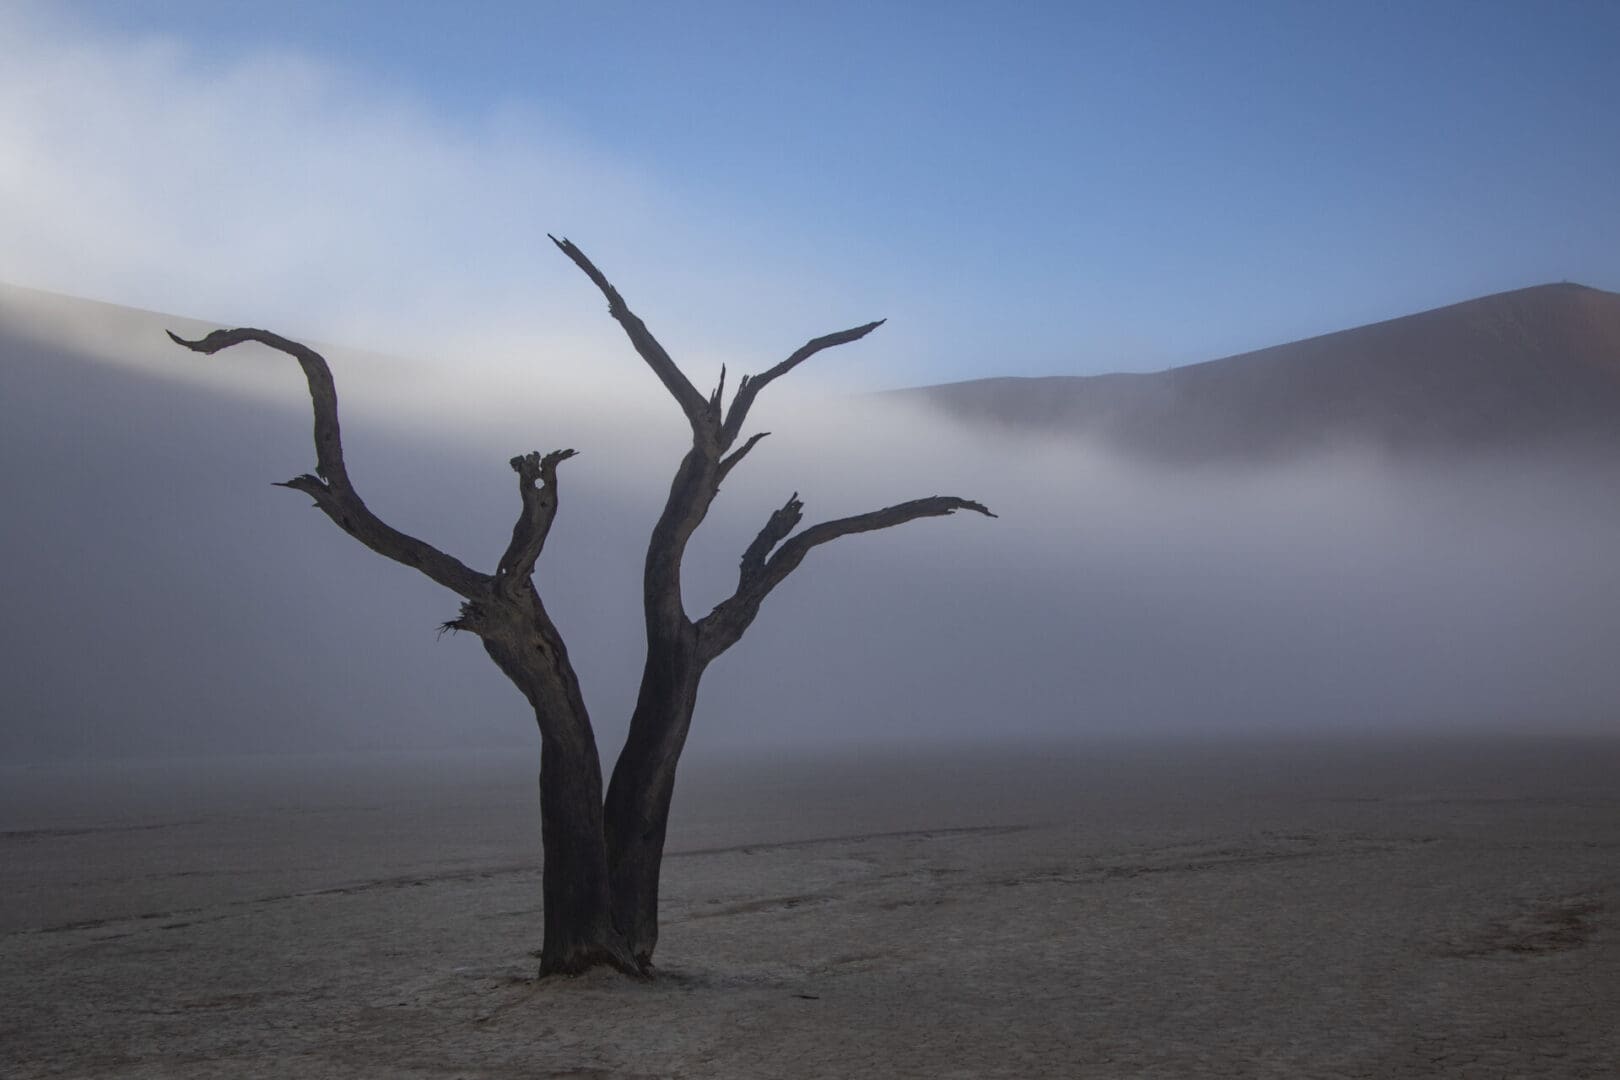 A lone tree in the middle of the desert.